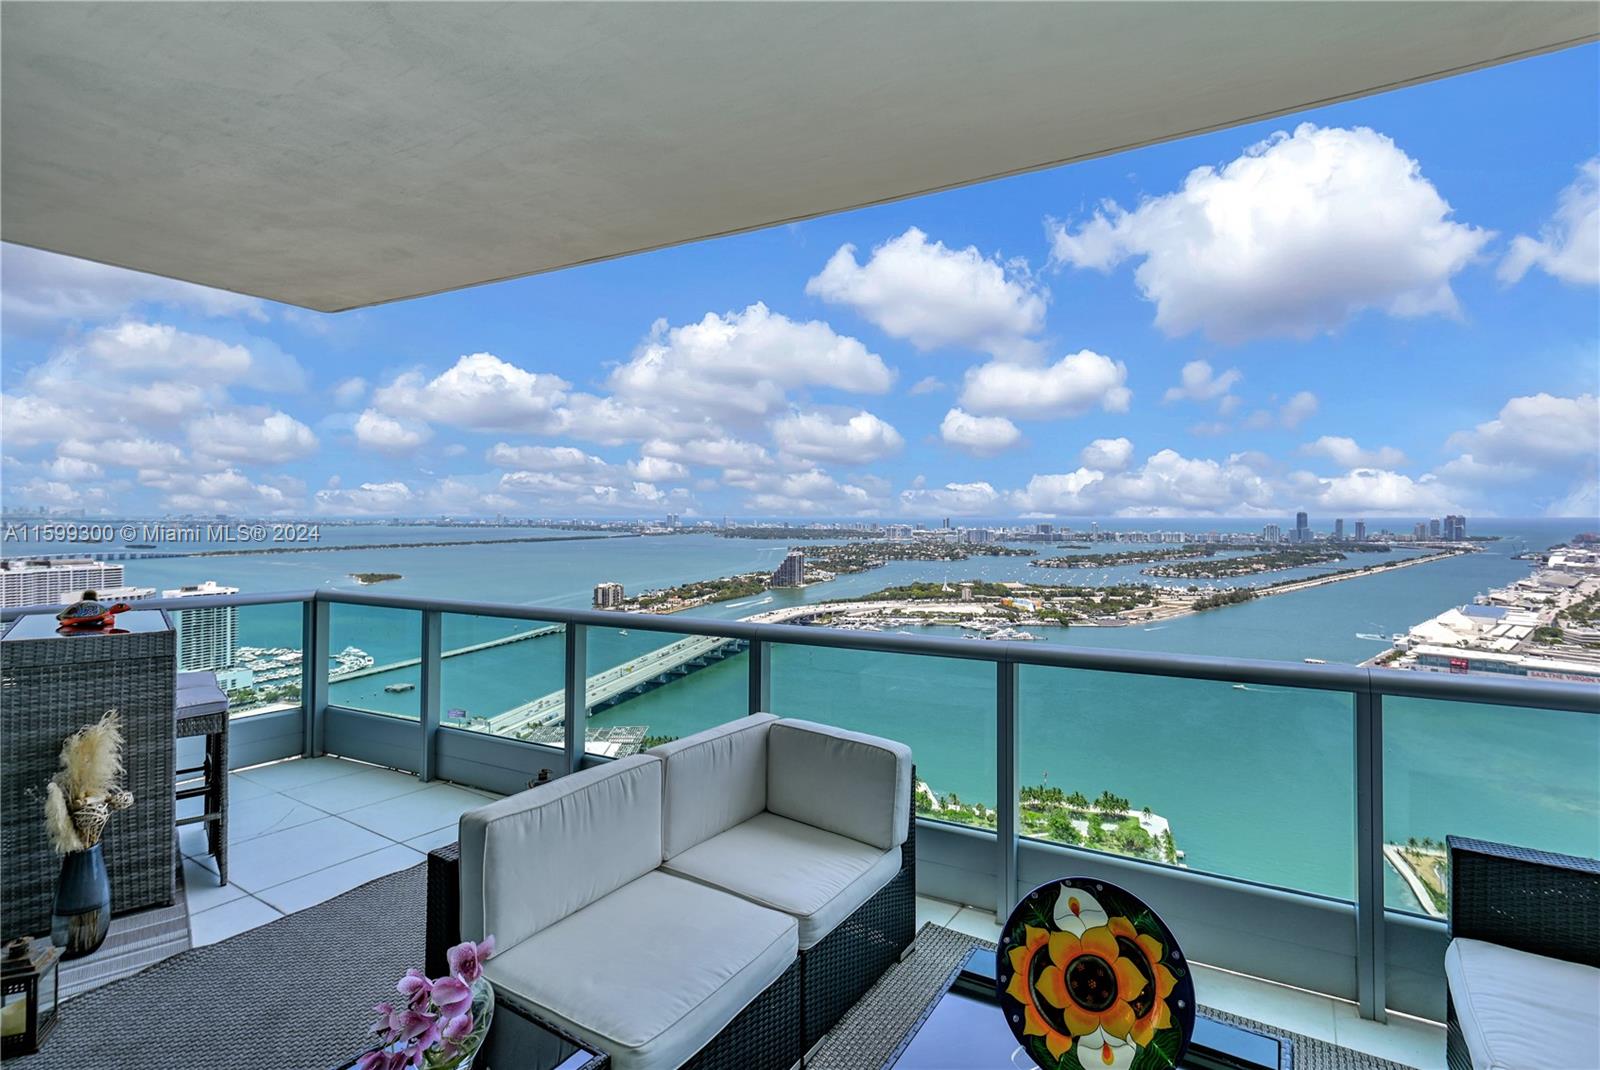 Breathtaking view unit on 56th floor fully furnished. Amazing panoramic view of ocean,intracoastal,miami beach and key biscayne. Excellent location boasting 5 star amenities, walking distance to popular restaurants, drugstore, supermarkets, metro mover and much more. This unit is a 1 bedroom plus den with 2 full baths including italian glass flooring throughout, custom built-ins in den and closets, kitchen with subzero and miele appliances, 2 TV's with cable and high speed internet included. Washer/dryer also in unit. Building amenities include fitness center, theater, lounge, 2 clubrooms plus conference room and kids play room. Spa includes his/hers areas with lockers, sauna, hot tubs and showers. Lots of storage in unit.